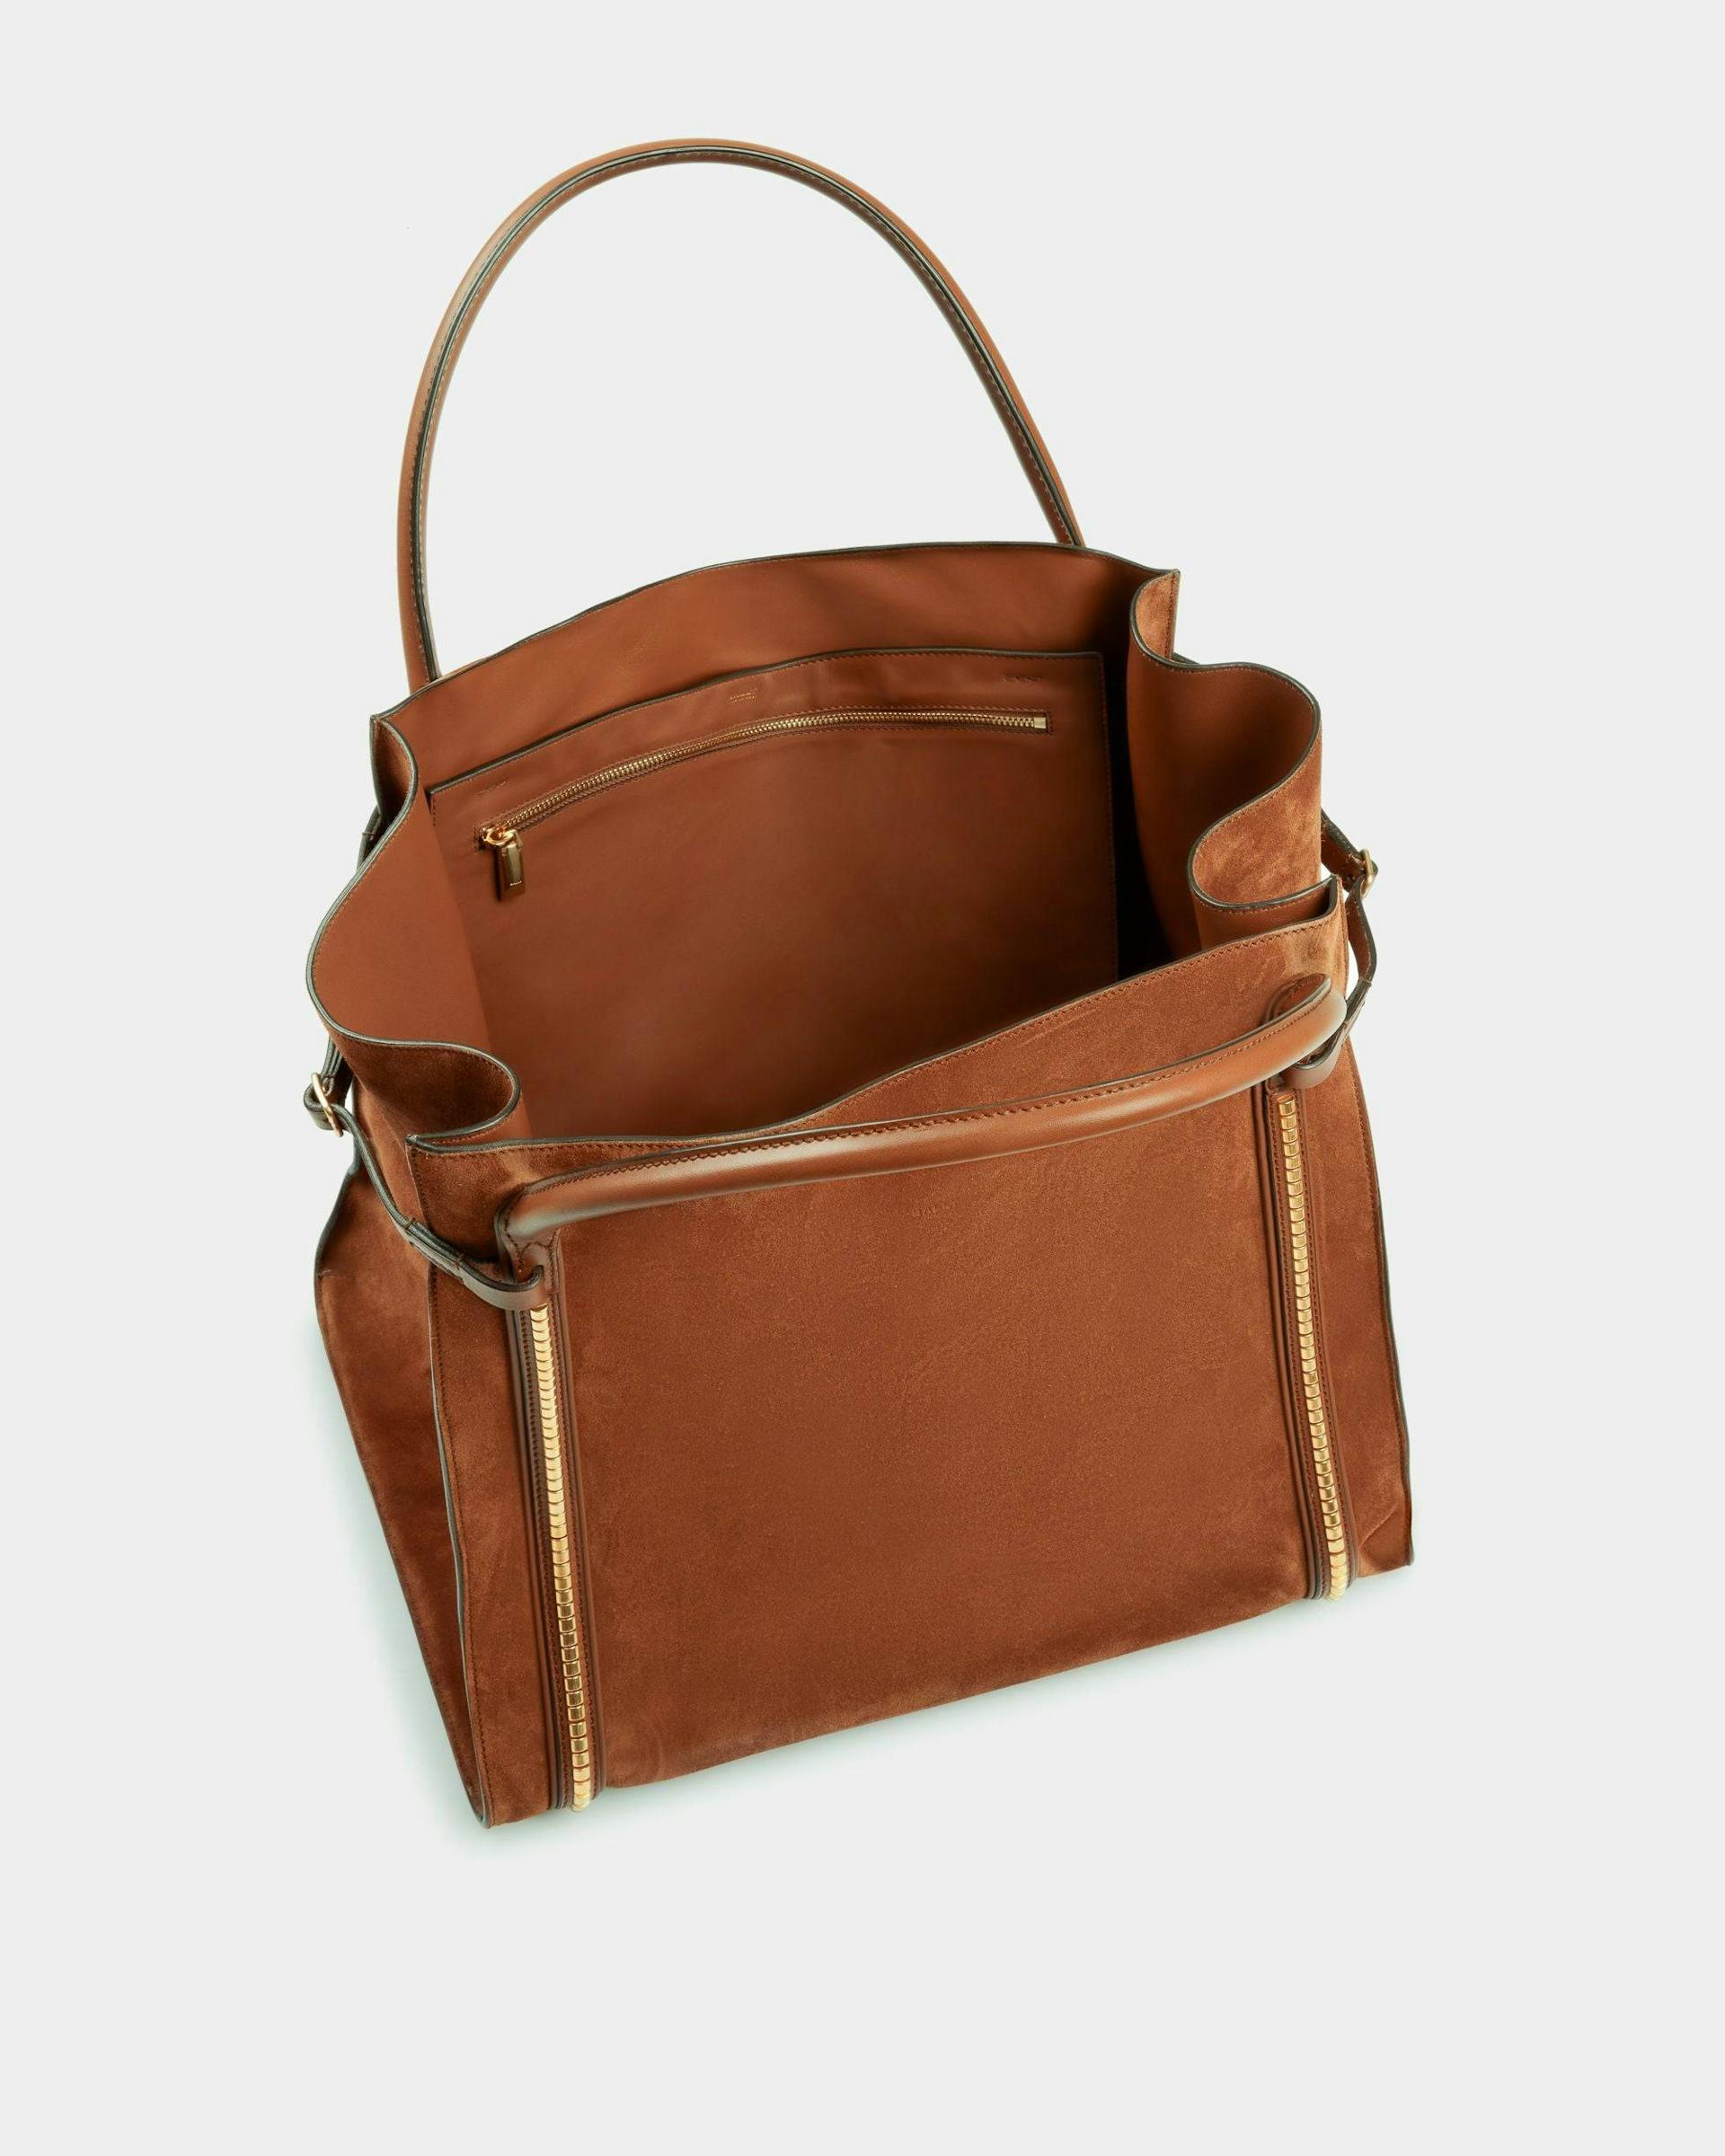 Women's Chesney Extra Large Tote Bag In Brown Suede Leather | Bally | Still Life Open / Inside